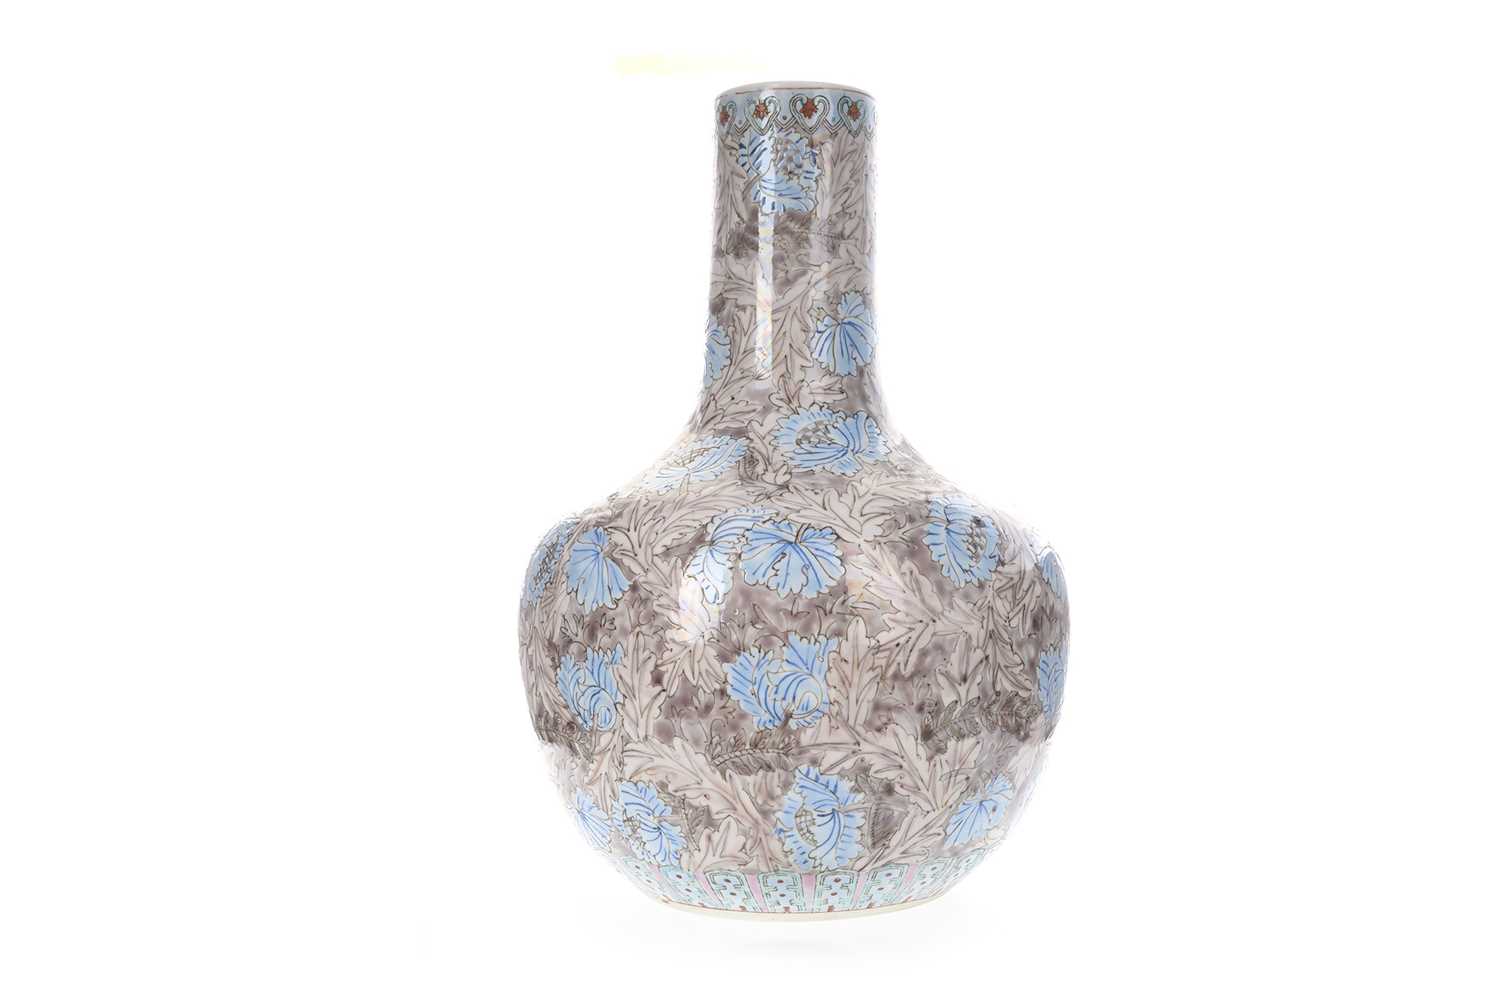 CHINESE BOTTLE VASE, LATE 19TH/EARLY 20TH CENTURY